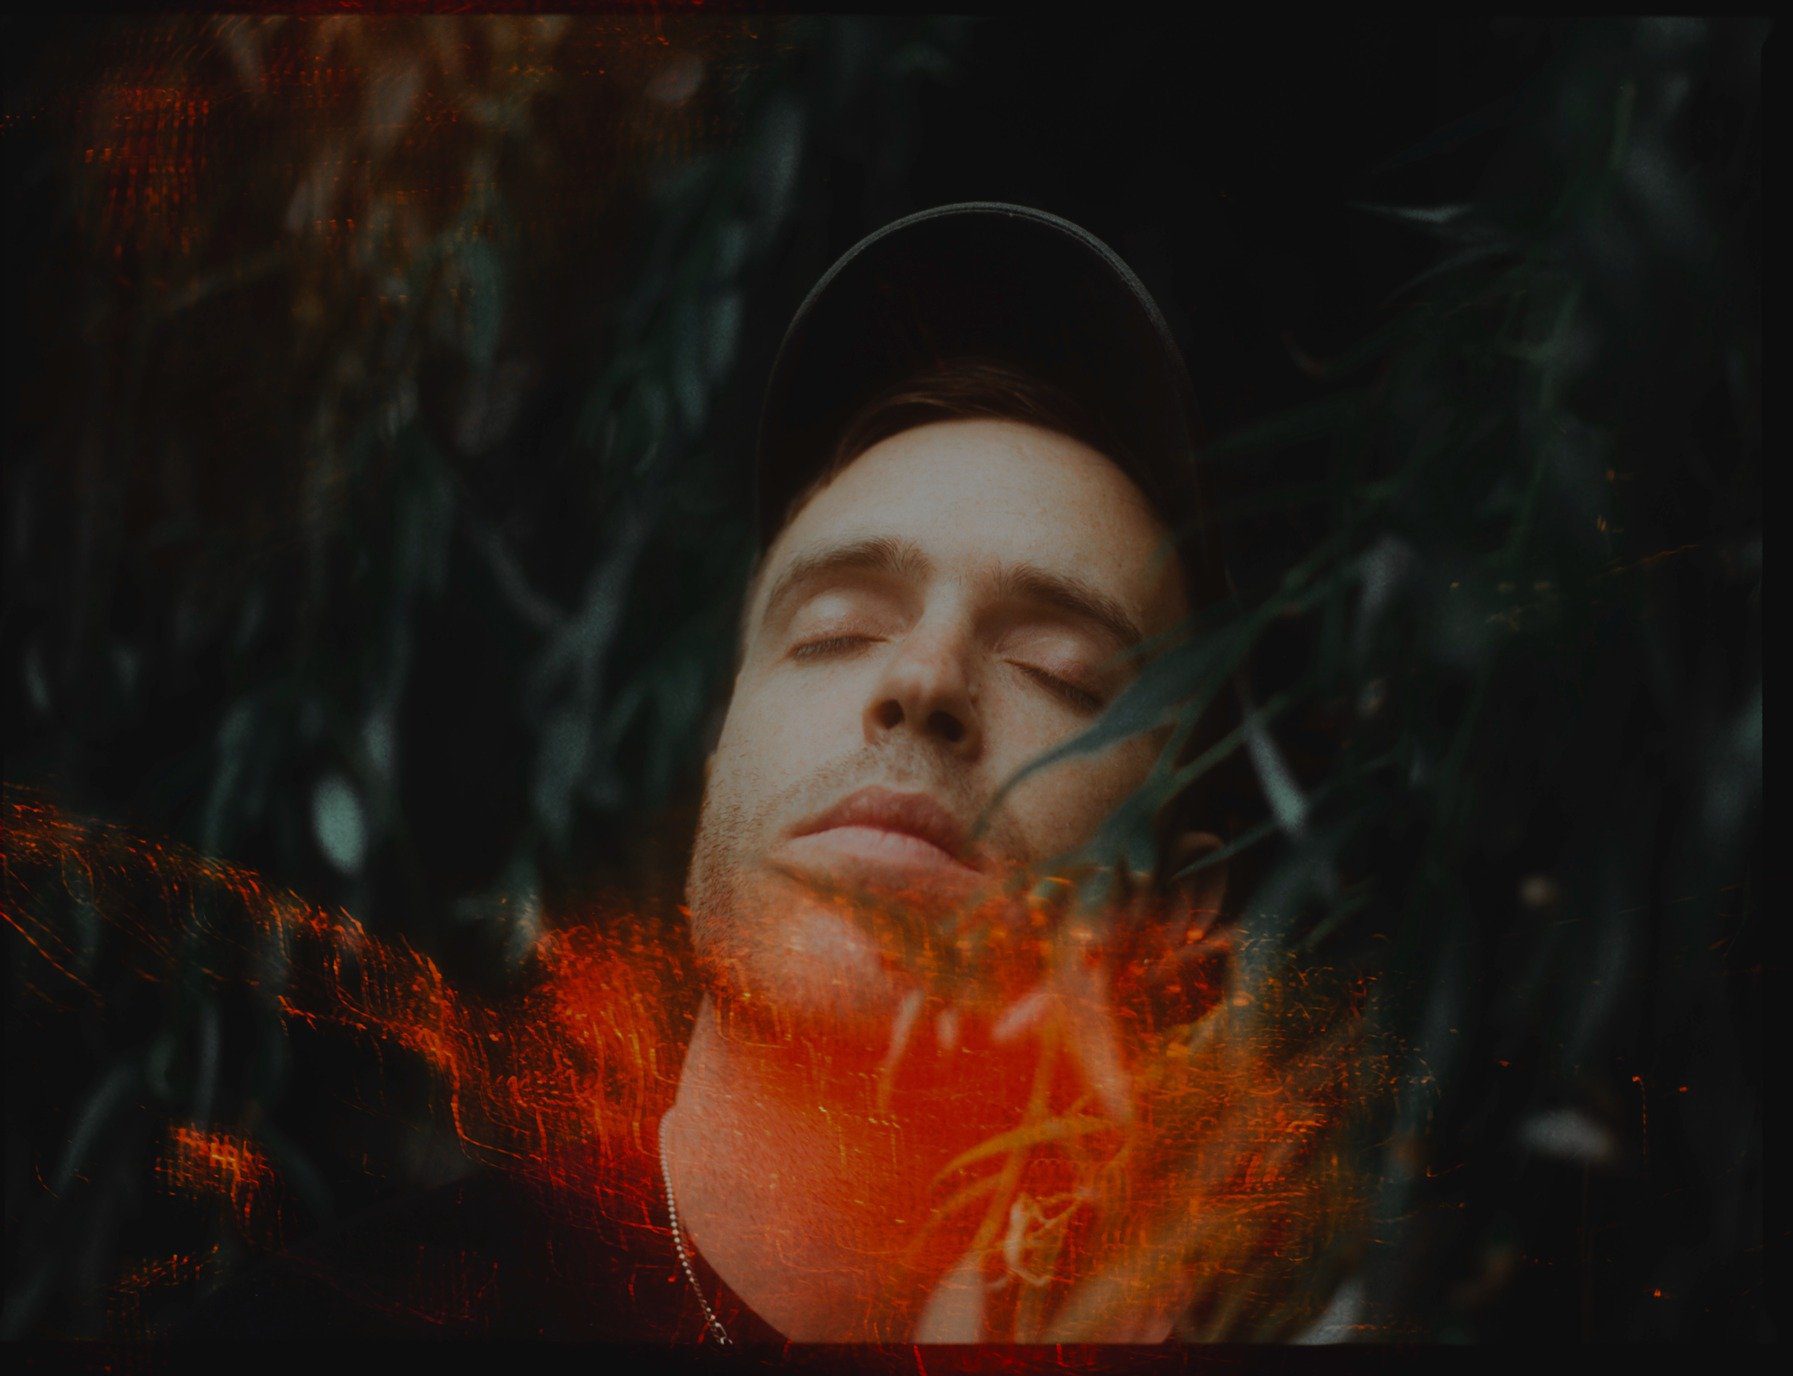 ‘Fearless, hopeful, surrendered’: In conversation with Benjamin Francis Leftwich